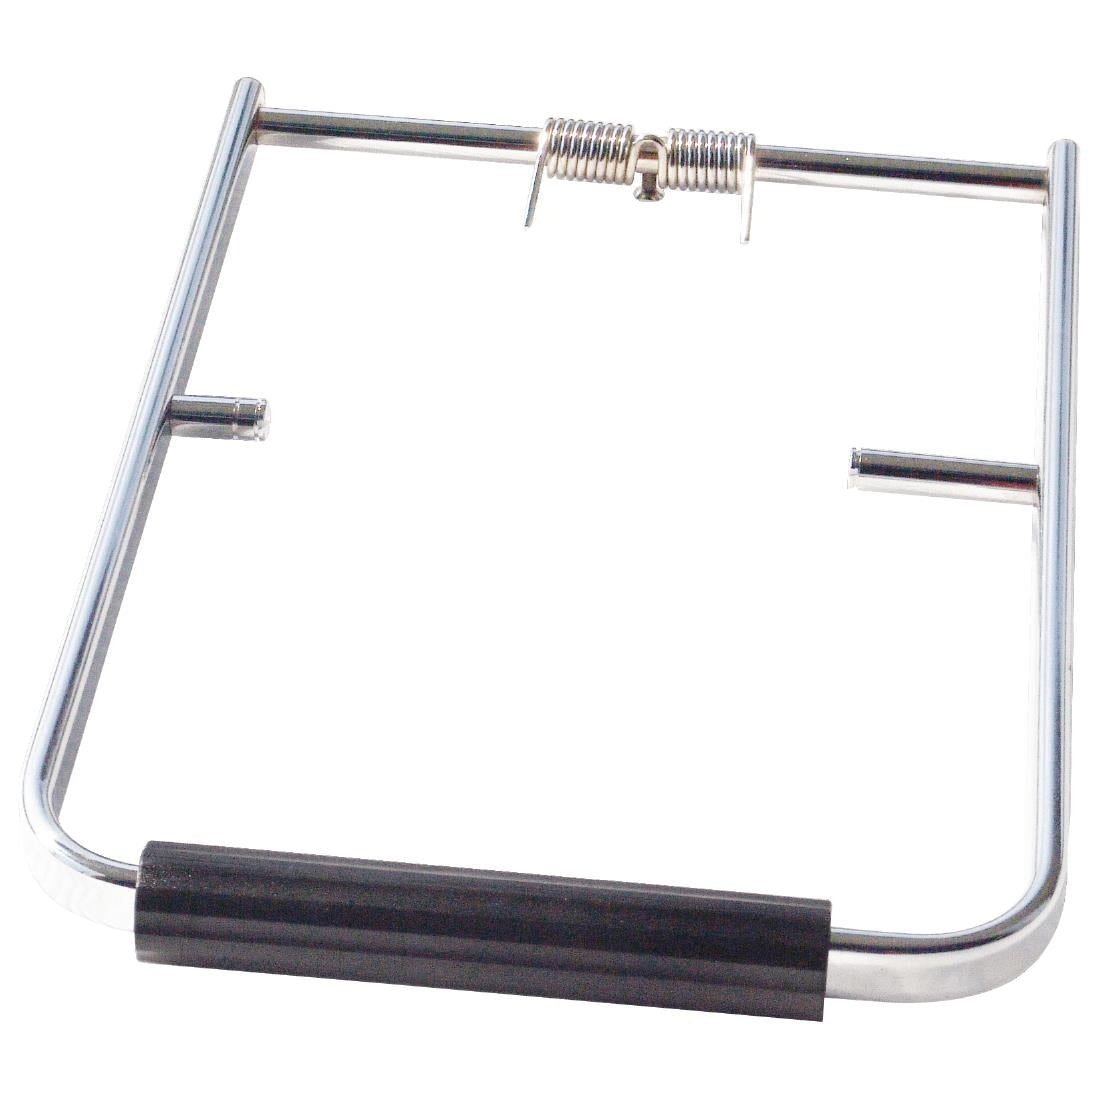 Buffalo Black Clip-on Handle JD Catering Equipment Solutions Ltd